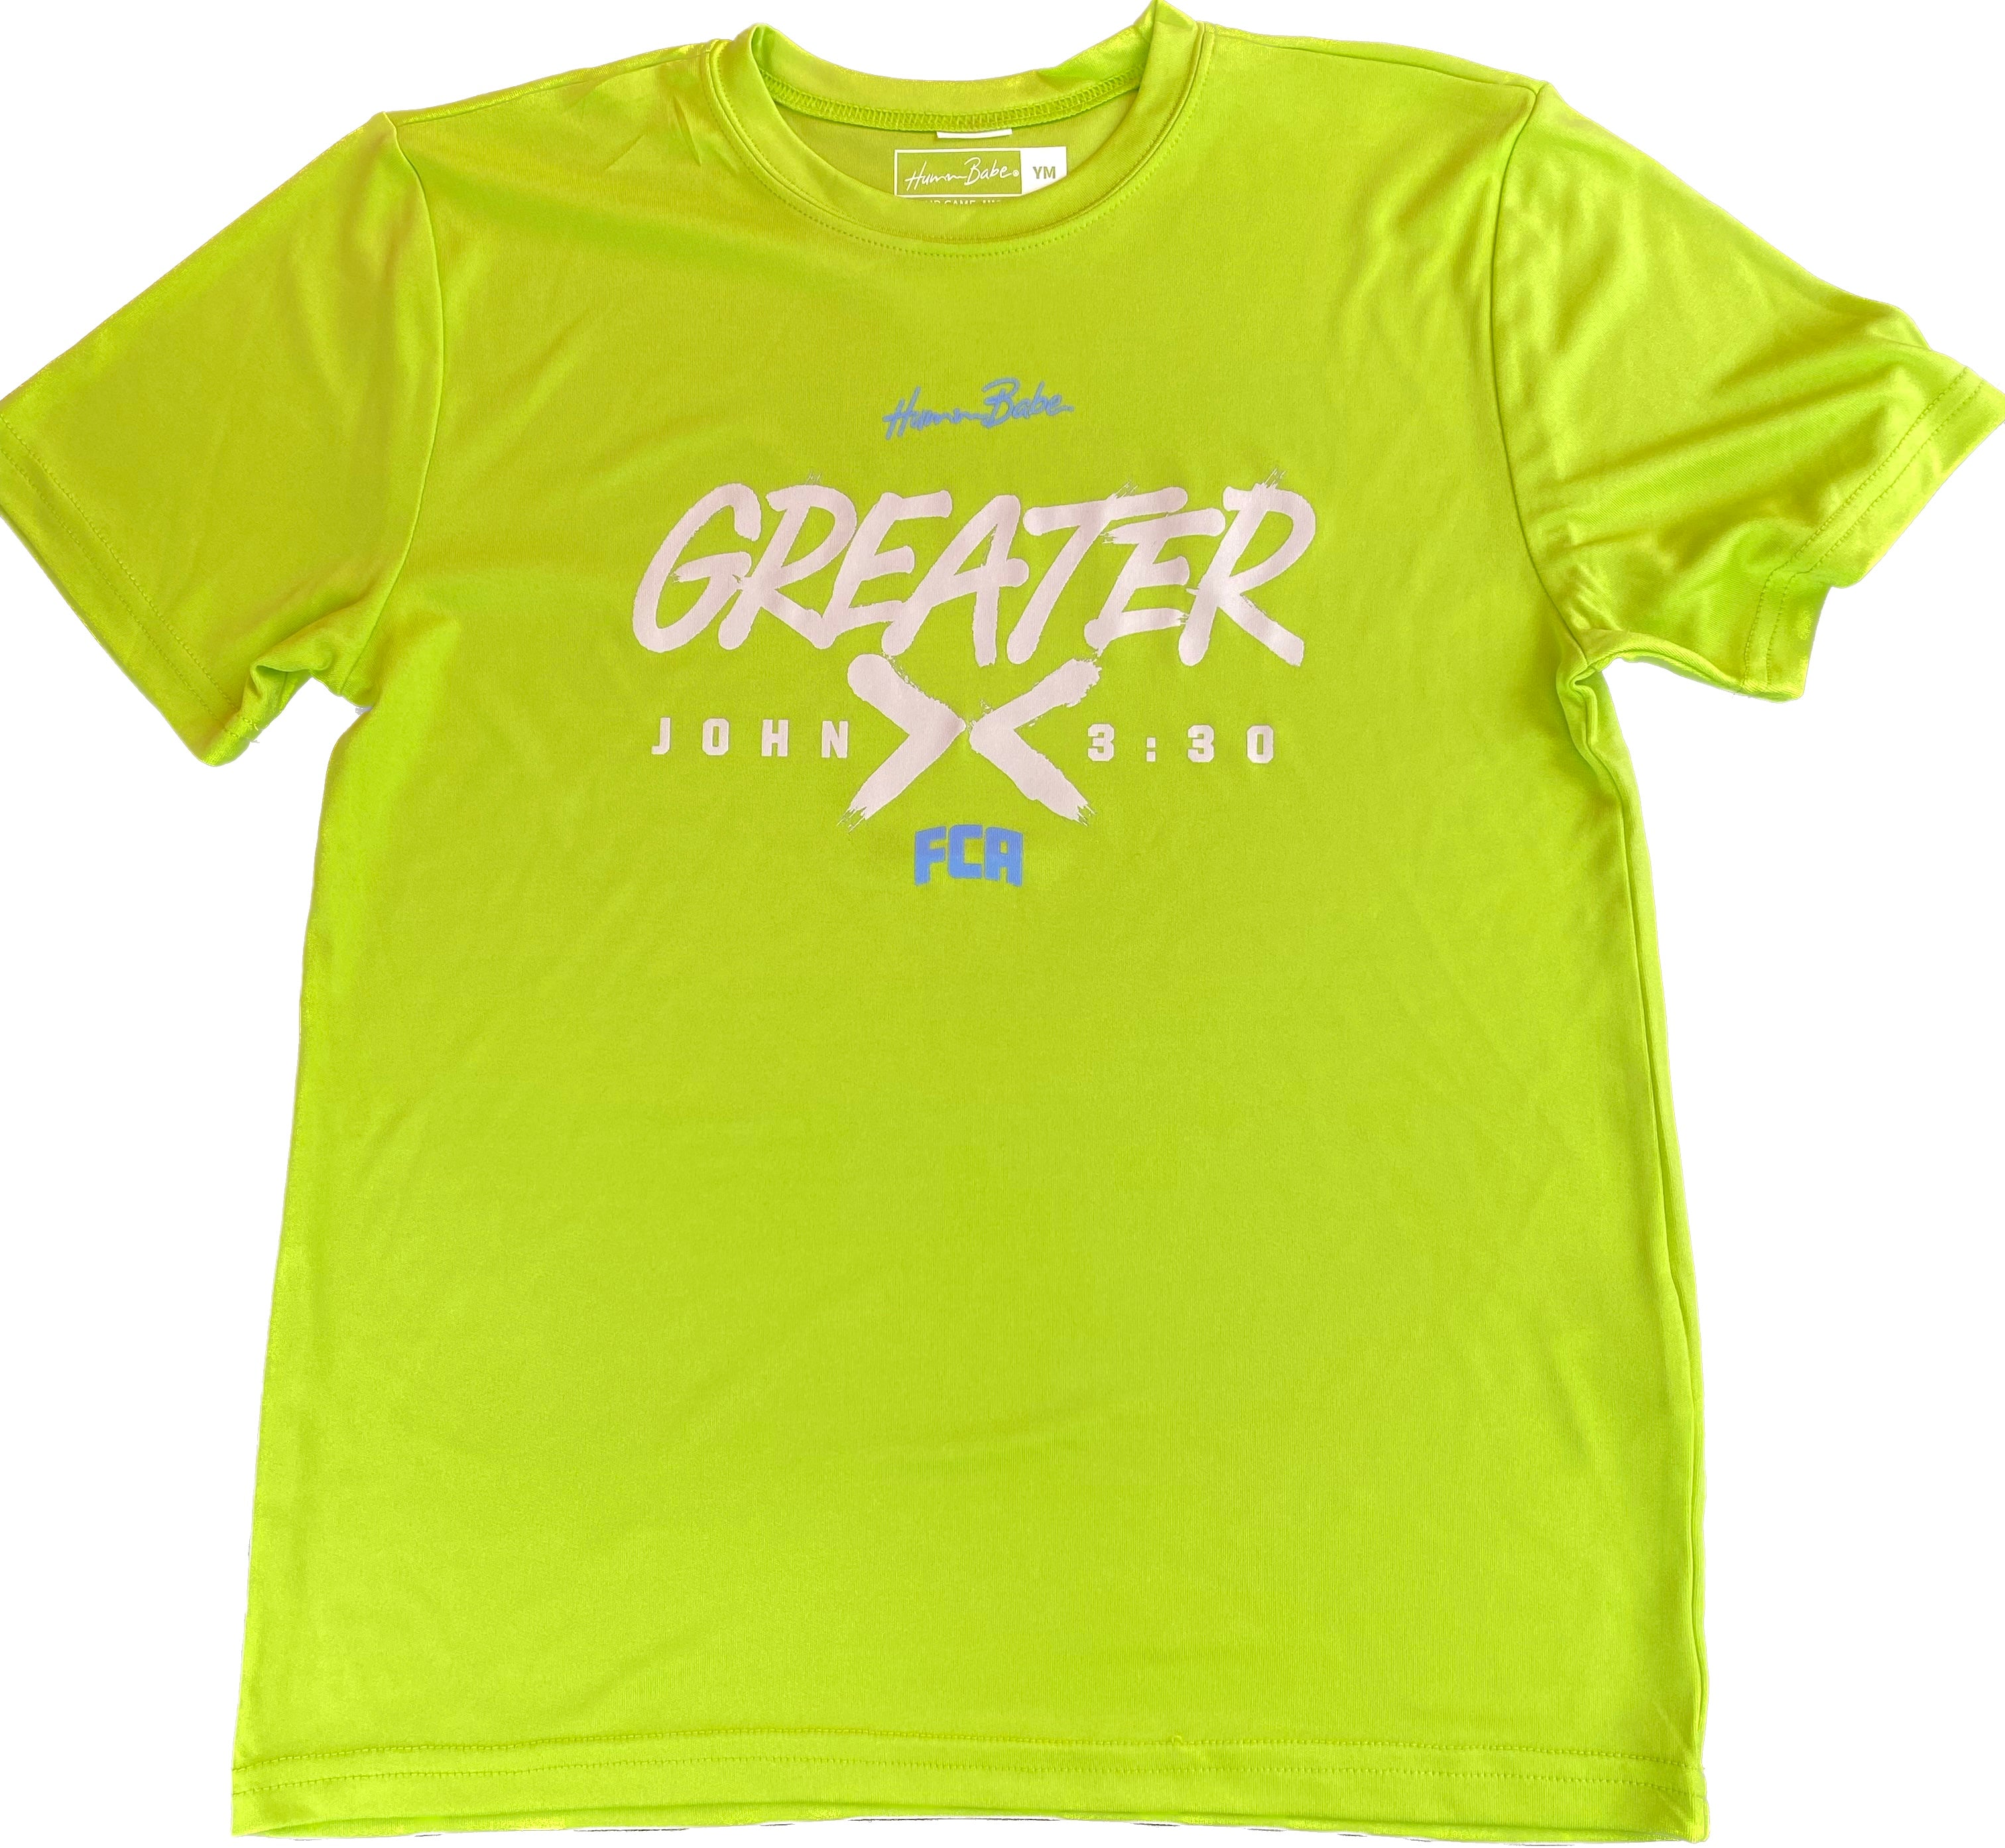 GREATER T-Shirt